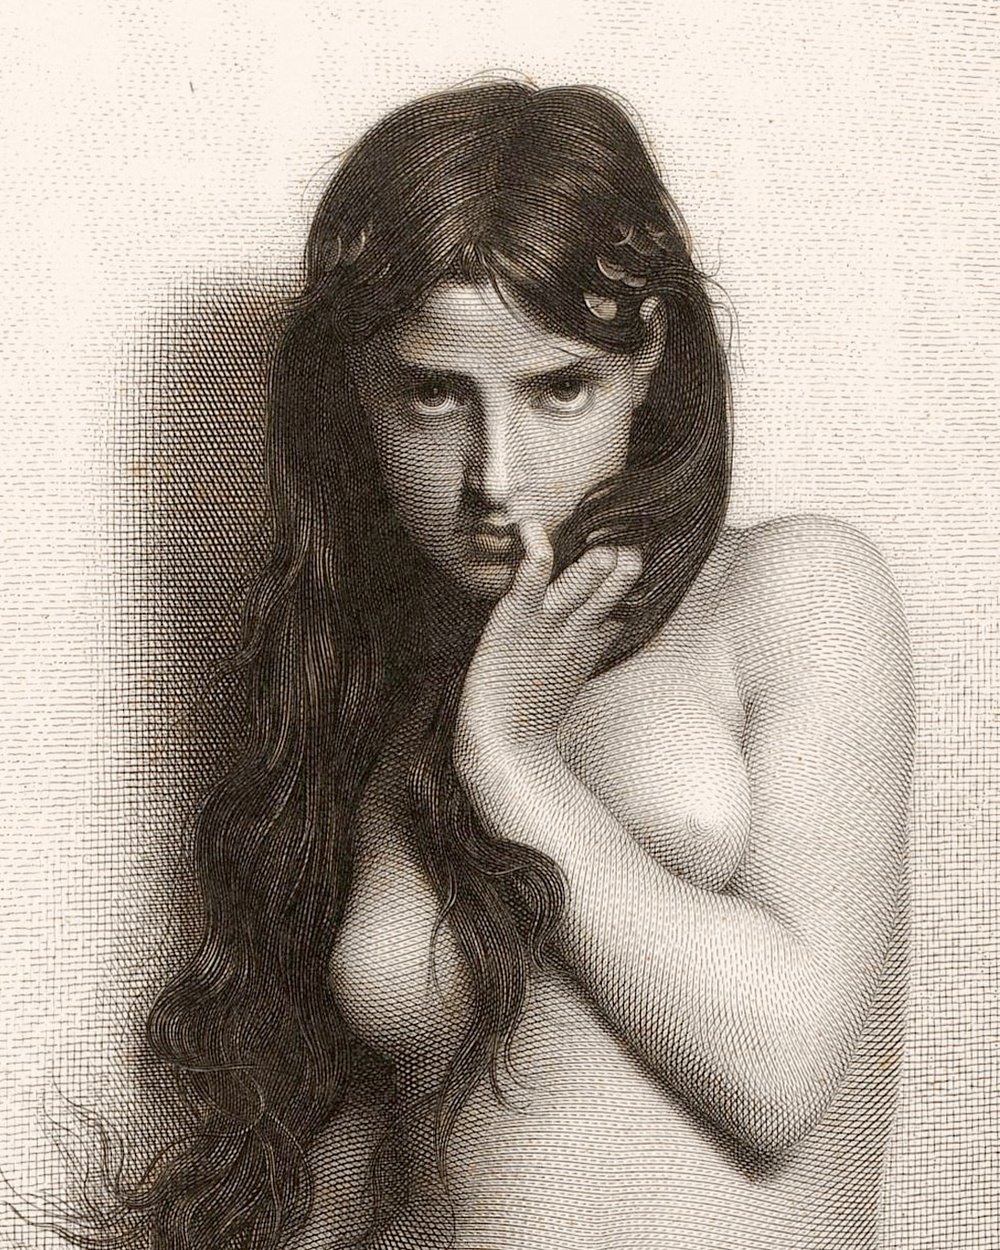 "Young naked woman as 'La Cigale'." (1874)